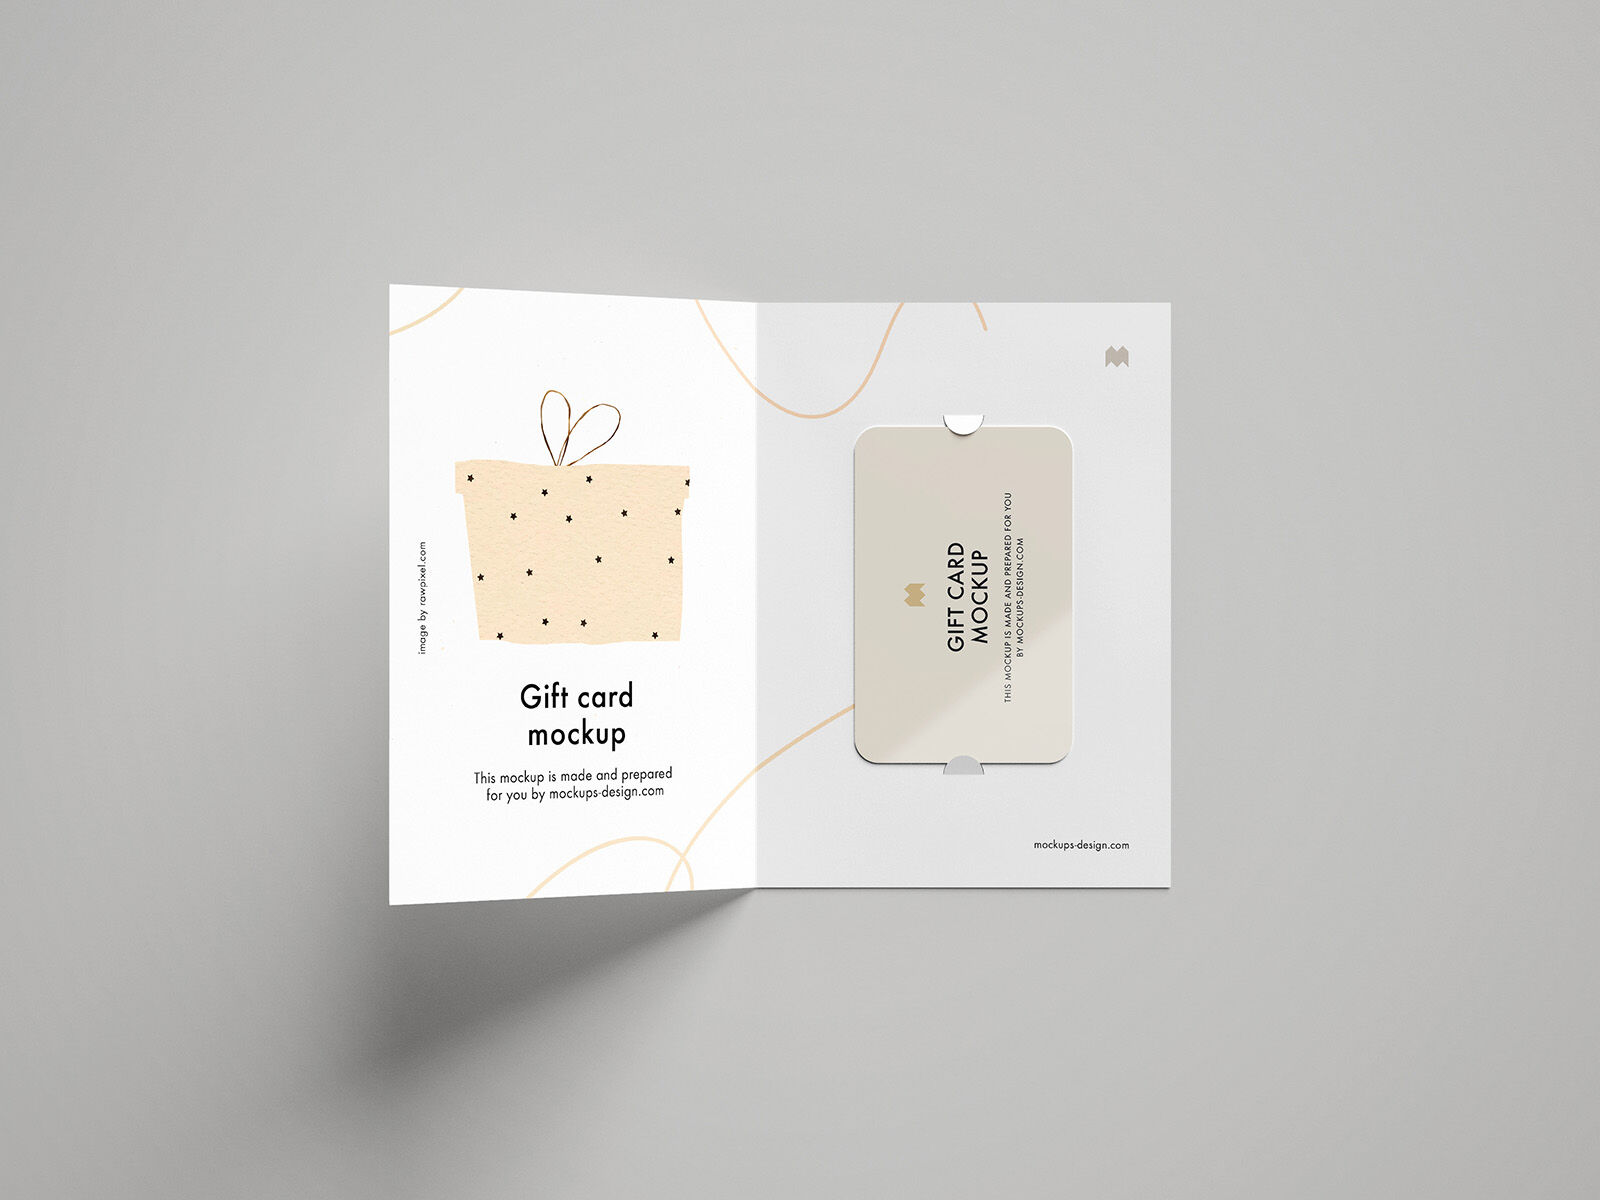 5 Gift Card and Gift card Holder Mockups in Different Views FREE PSD